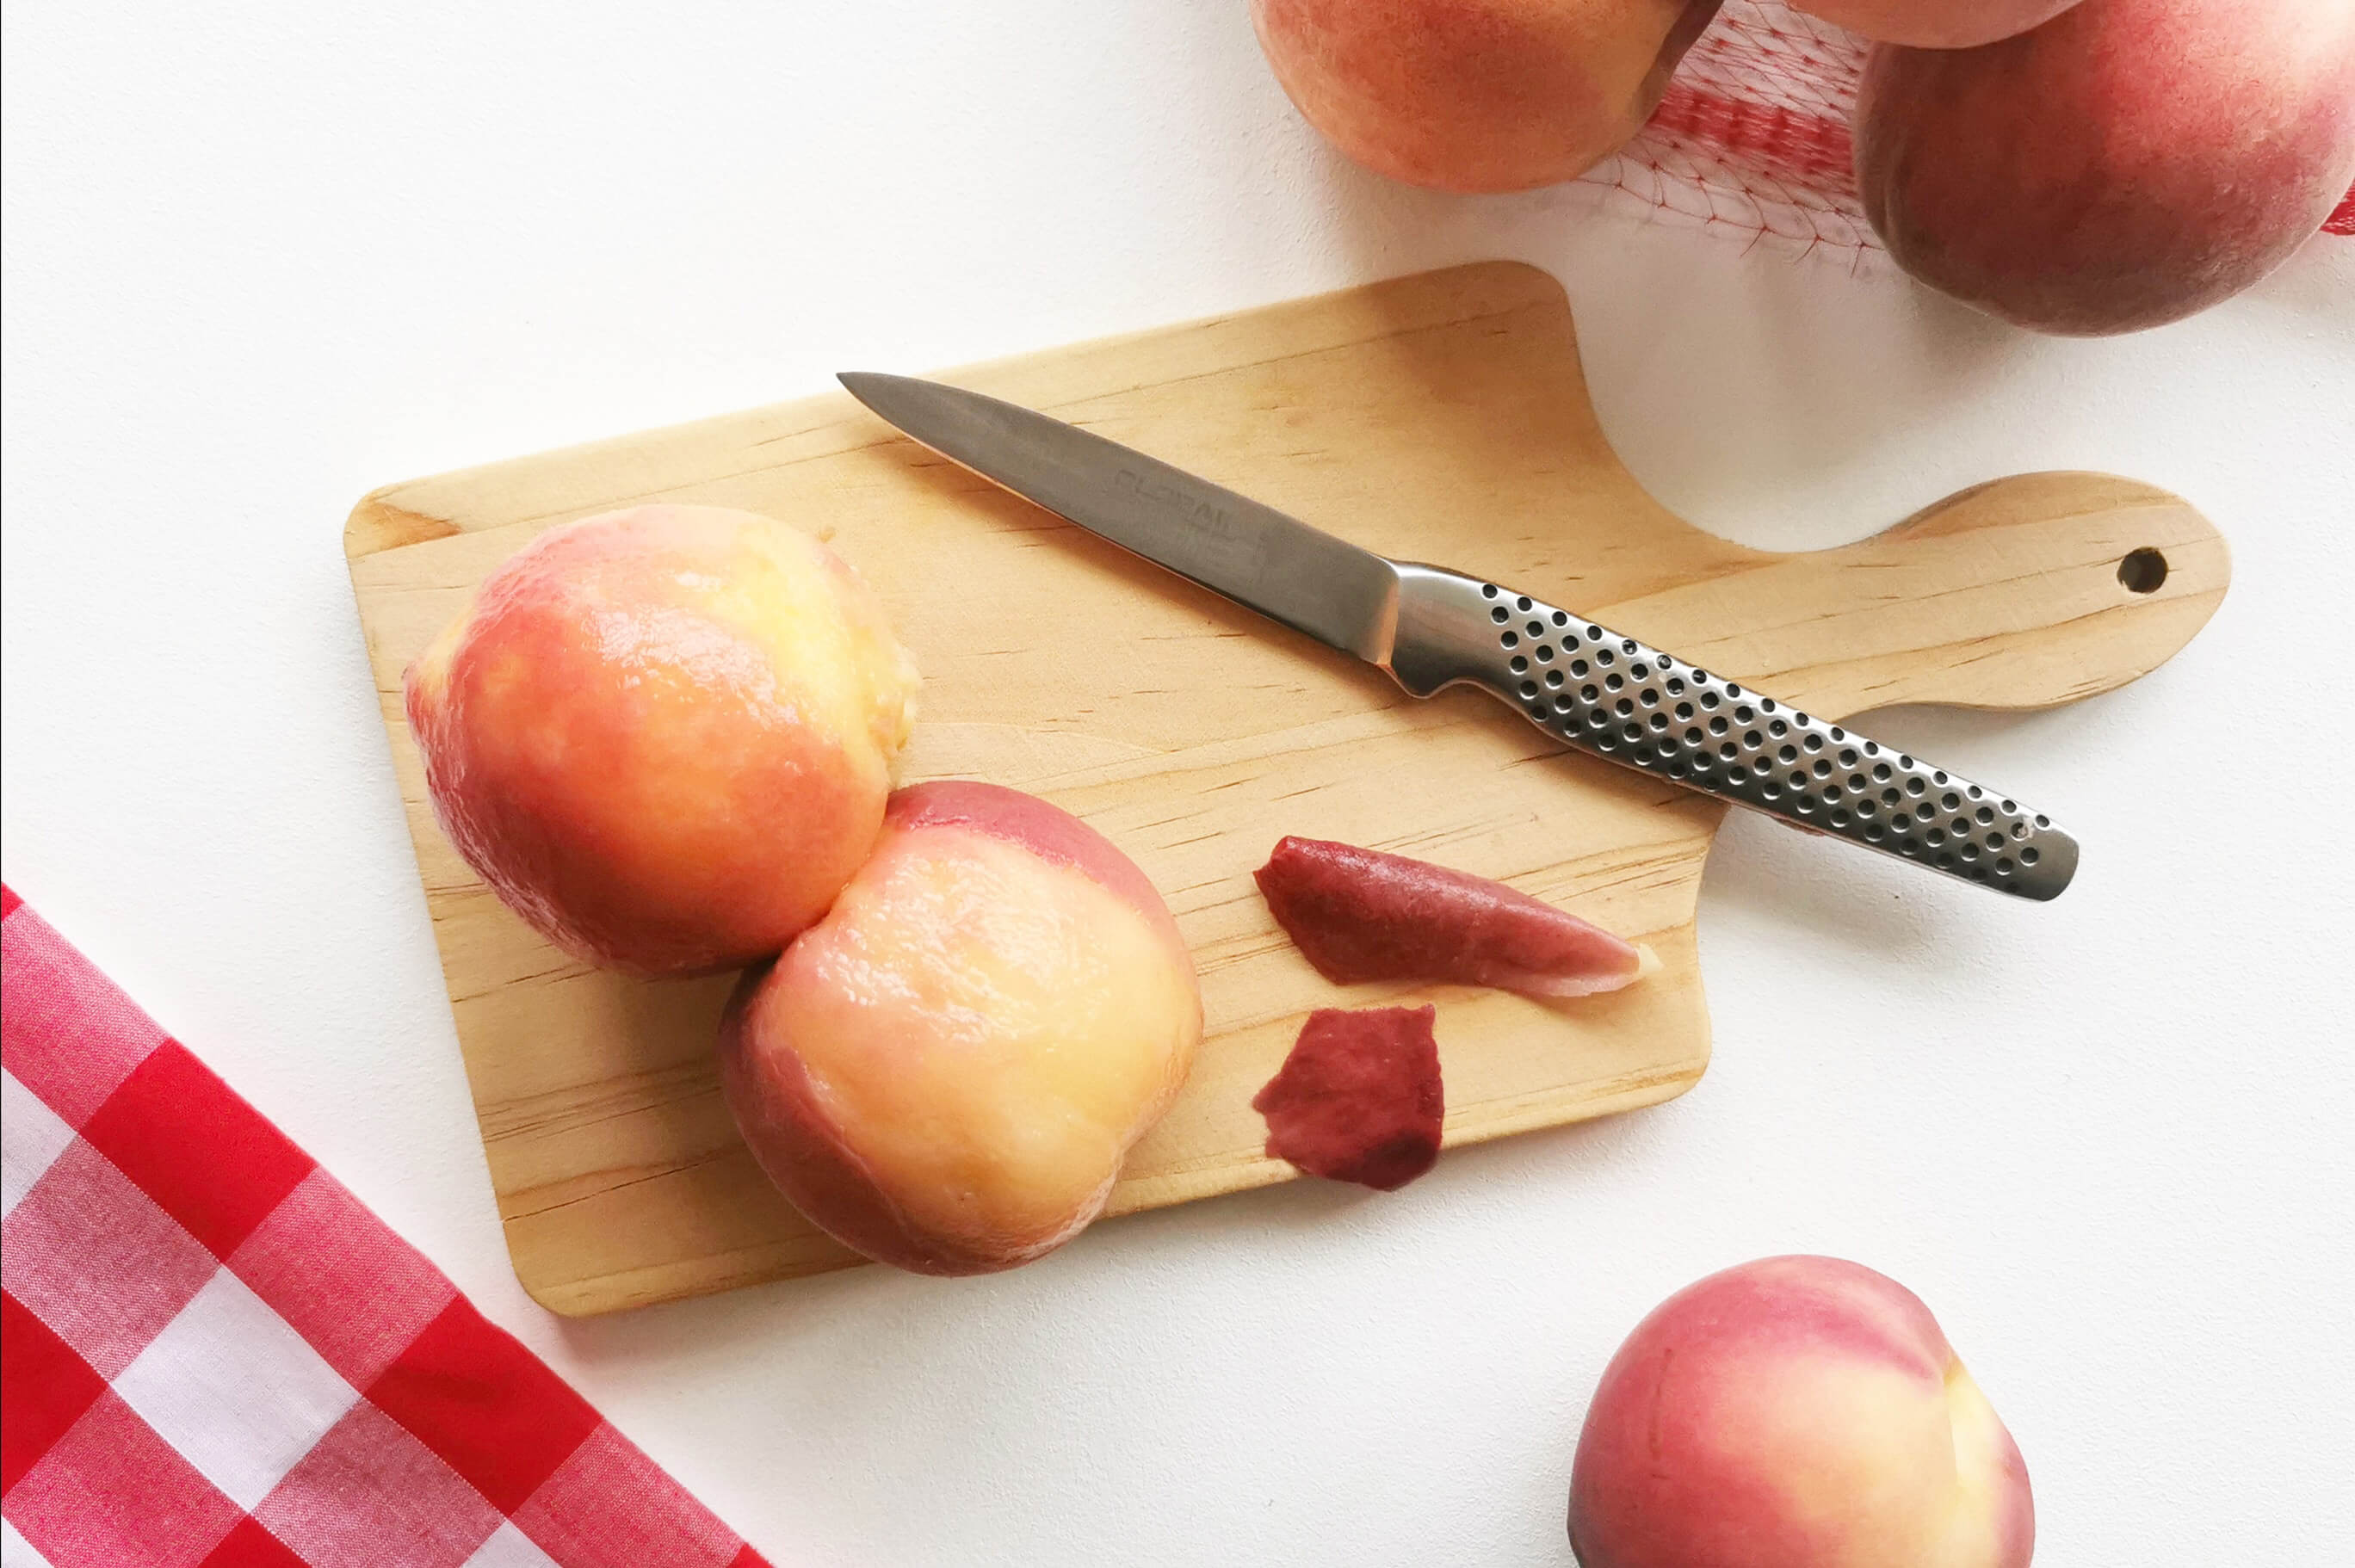 A chopping board with two peaches on it and some removed peach skin